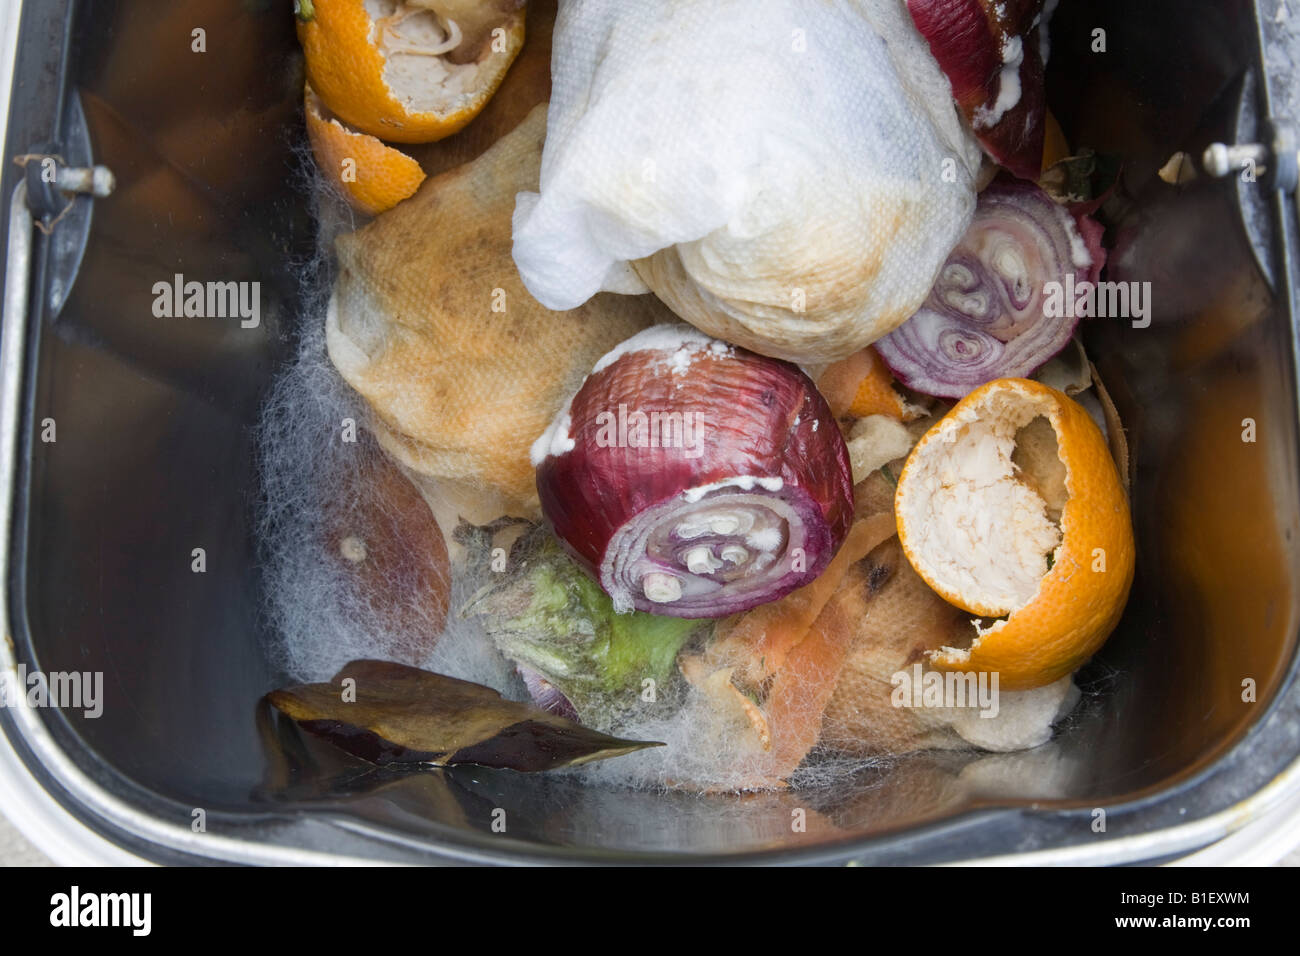 Mouldy vegetables in waste bin with fungus growing on rotten organic food Stock Photo